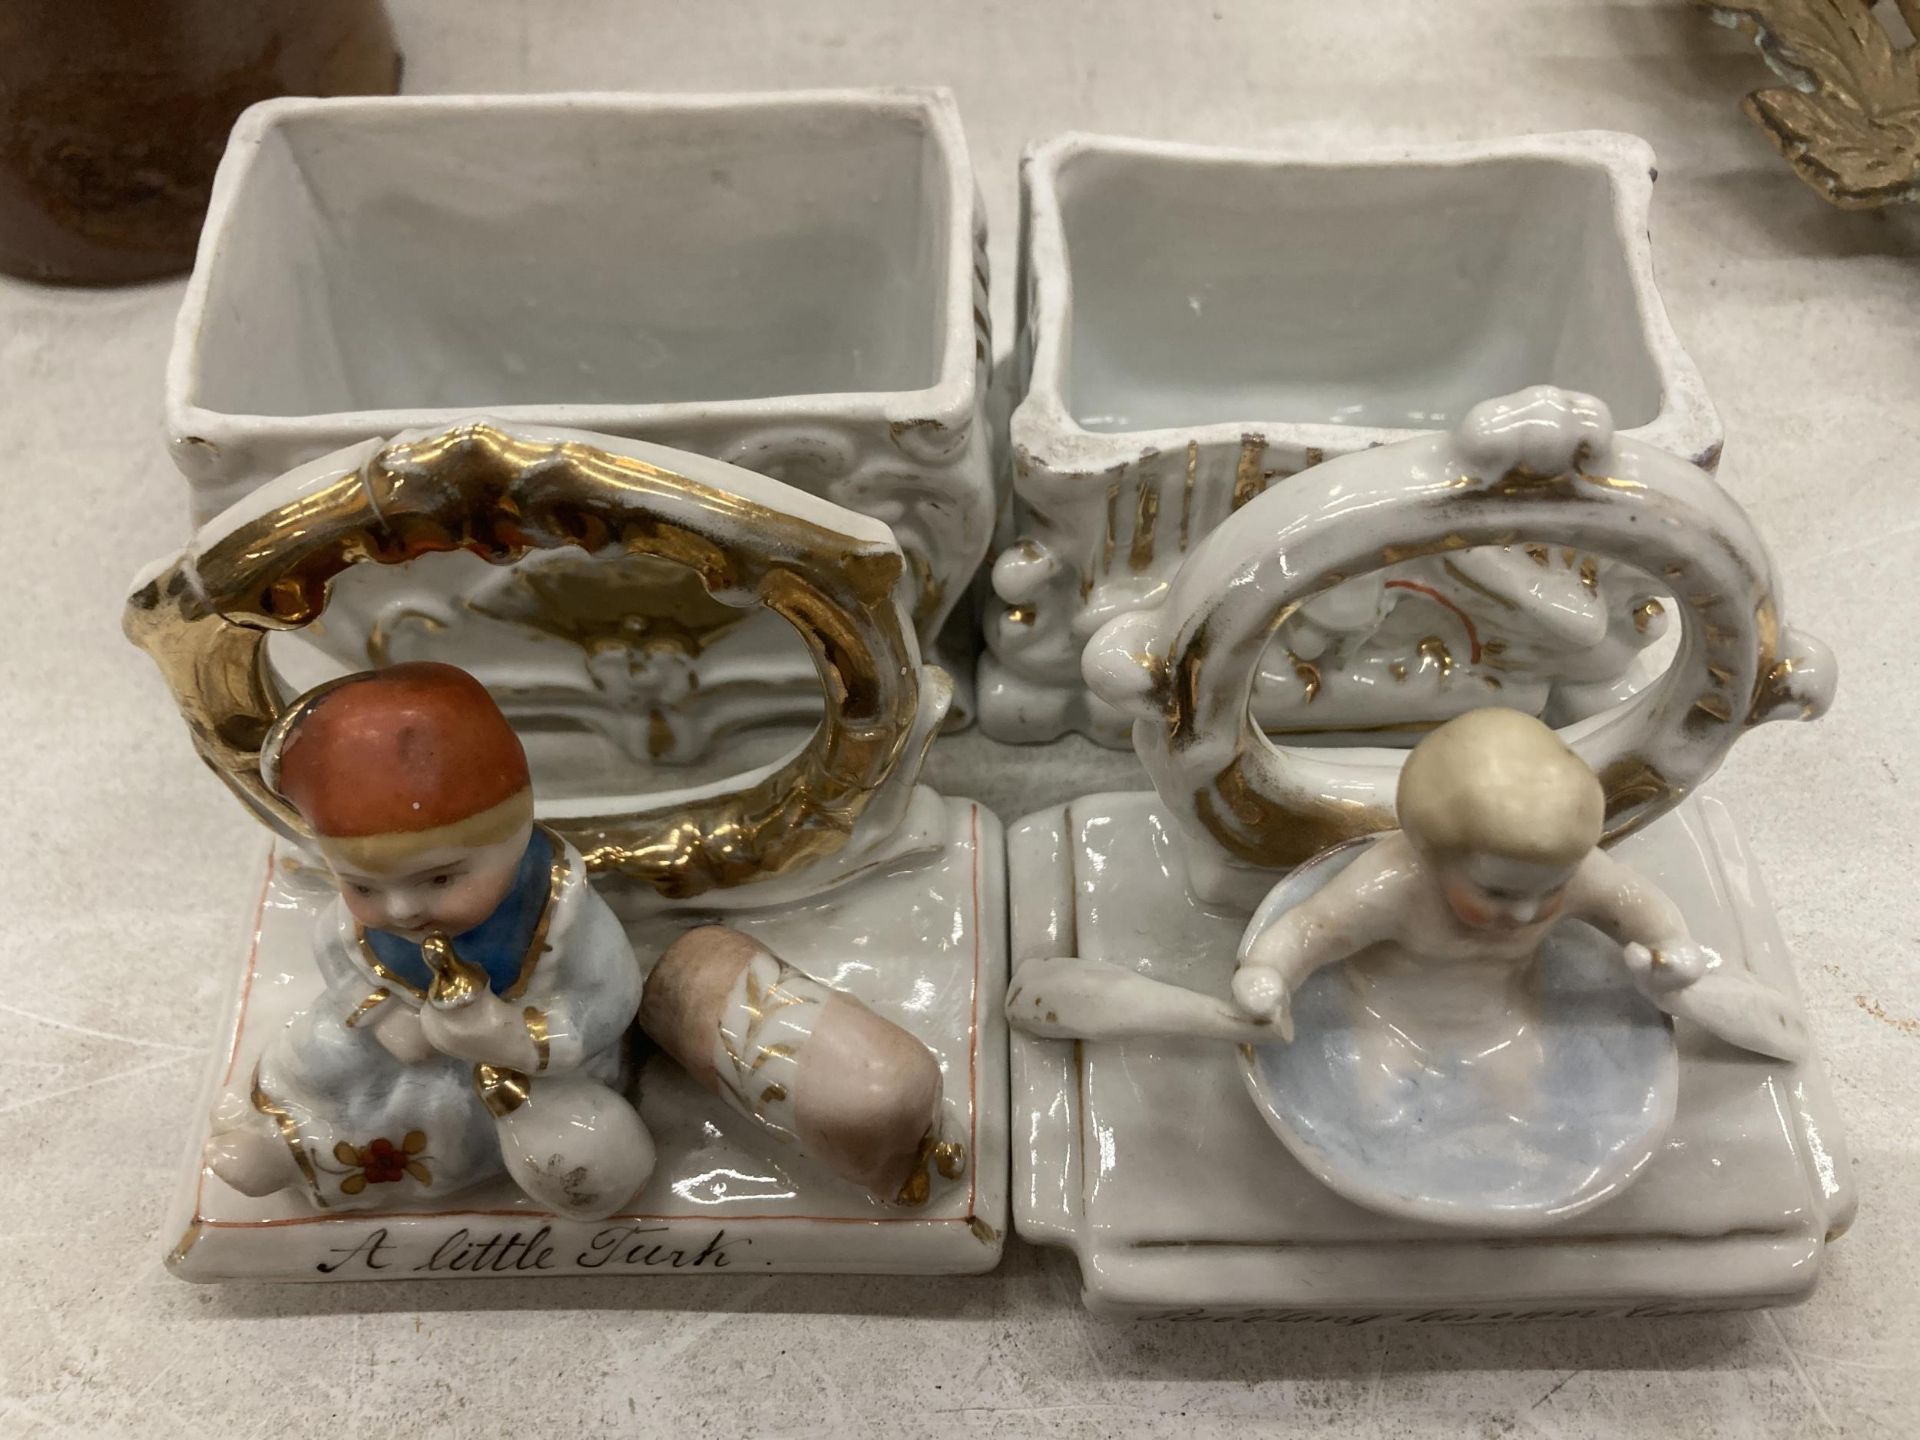 TWO VINTAGE GERMAN FAIRINGS TRINKET BOXES, TO INCLUDE 'A LITTLE TURK' - RESTORED AND 'PADDLING HIS - Image 2 of 4